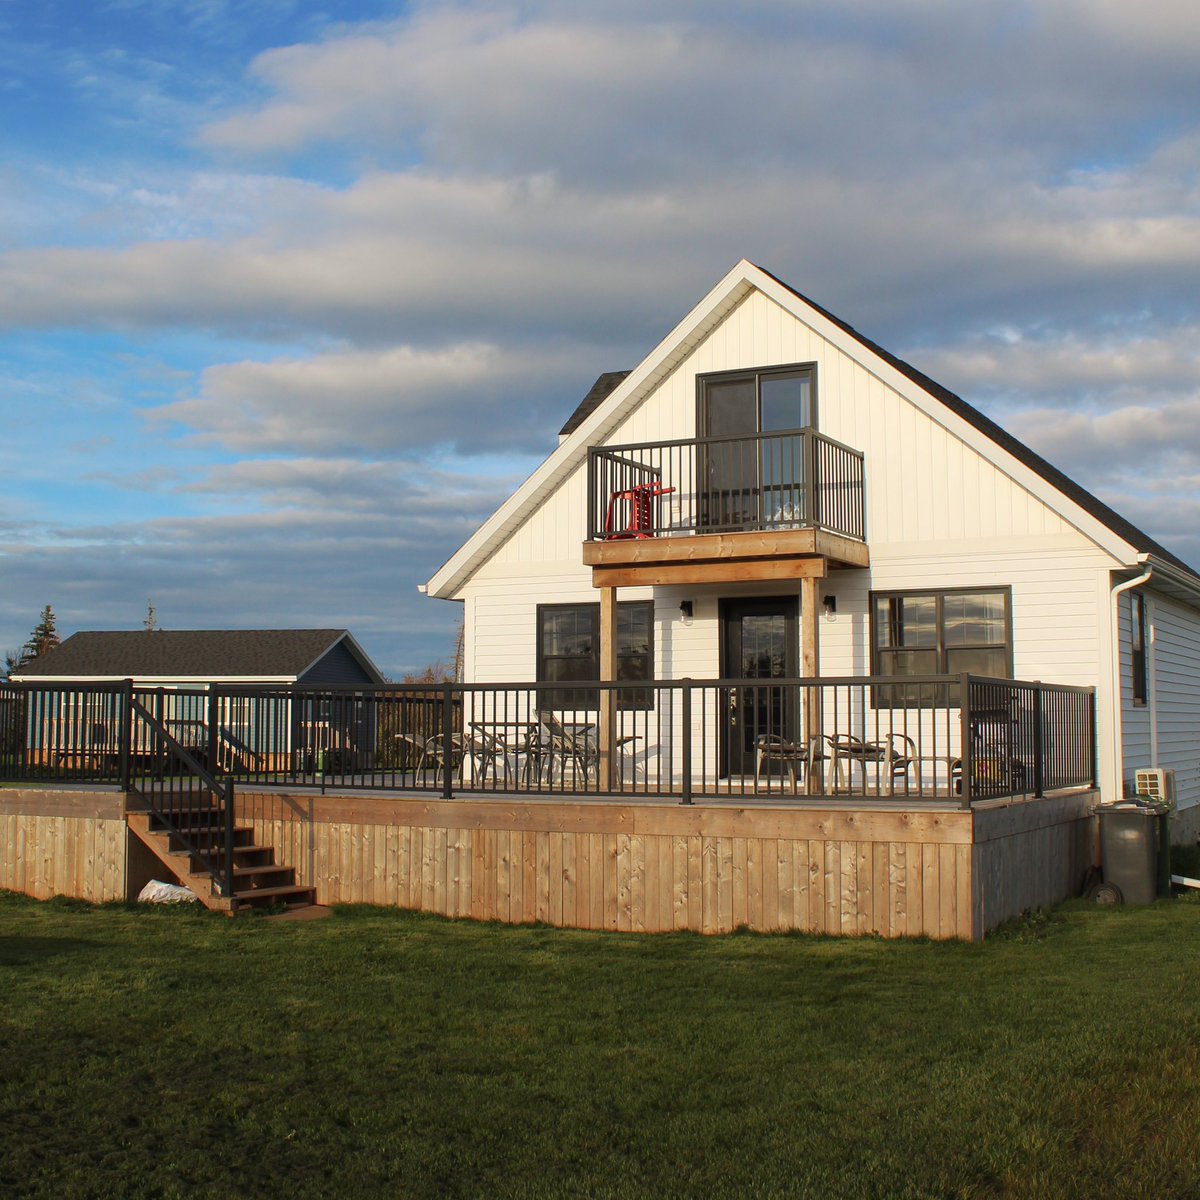 We are live! The Lookout, our first rental is listed on Airbnb, follow the link below to your Island escape! ⬇️

airbnb.com/h/thelookoutpei 

#TheLookout #princeedwardisland #islandlife #island